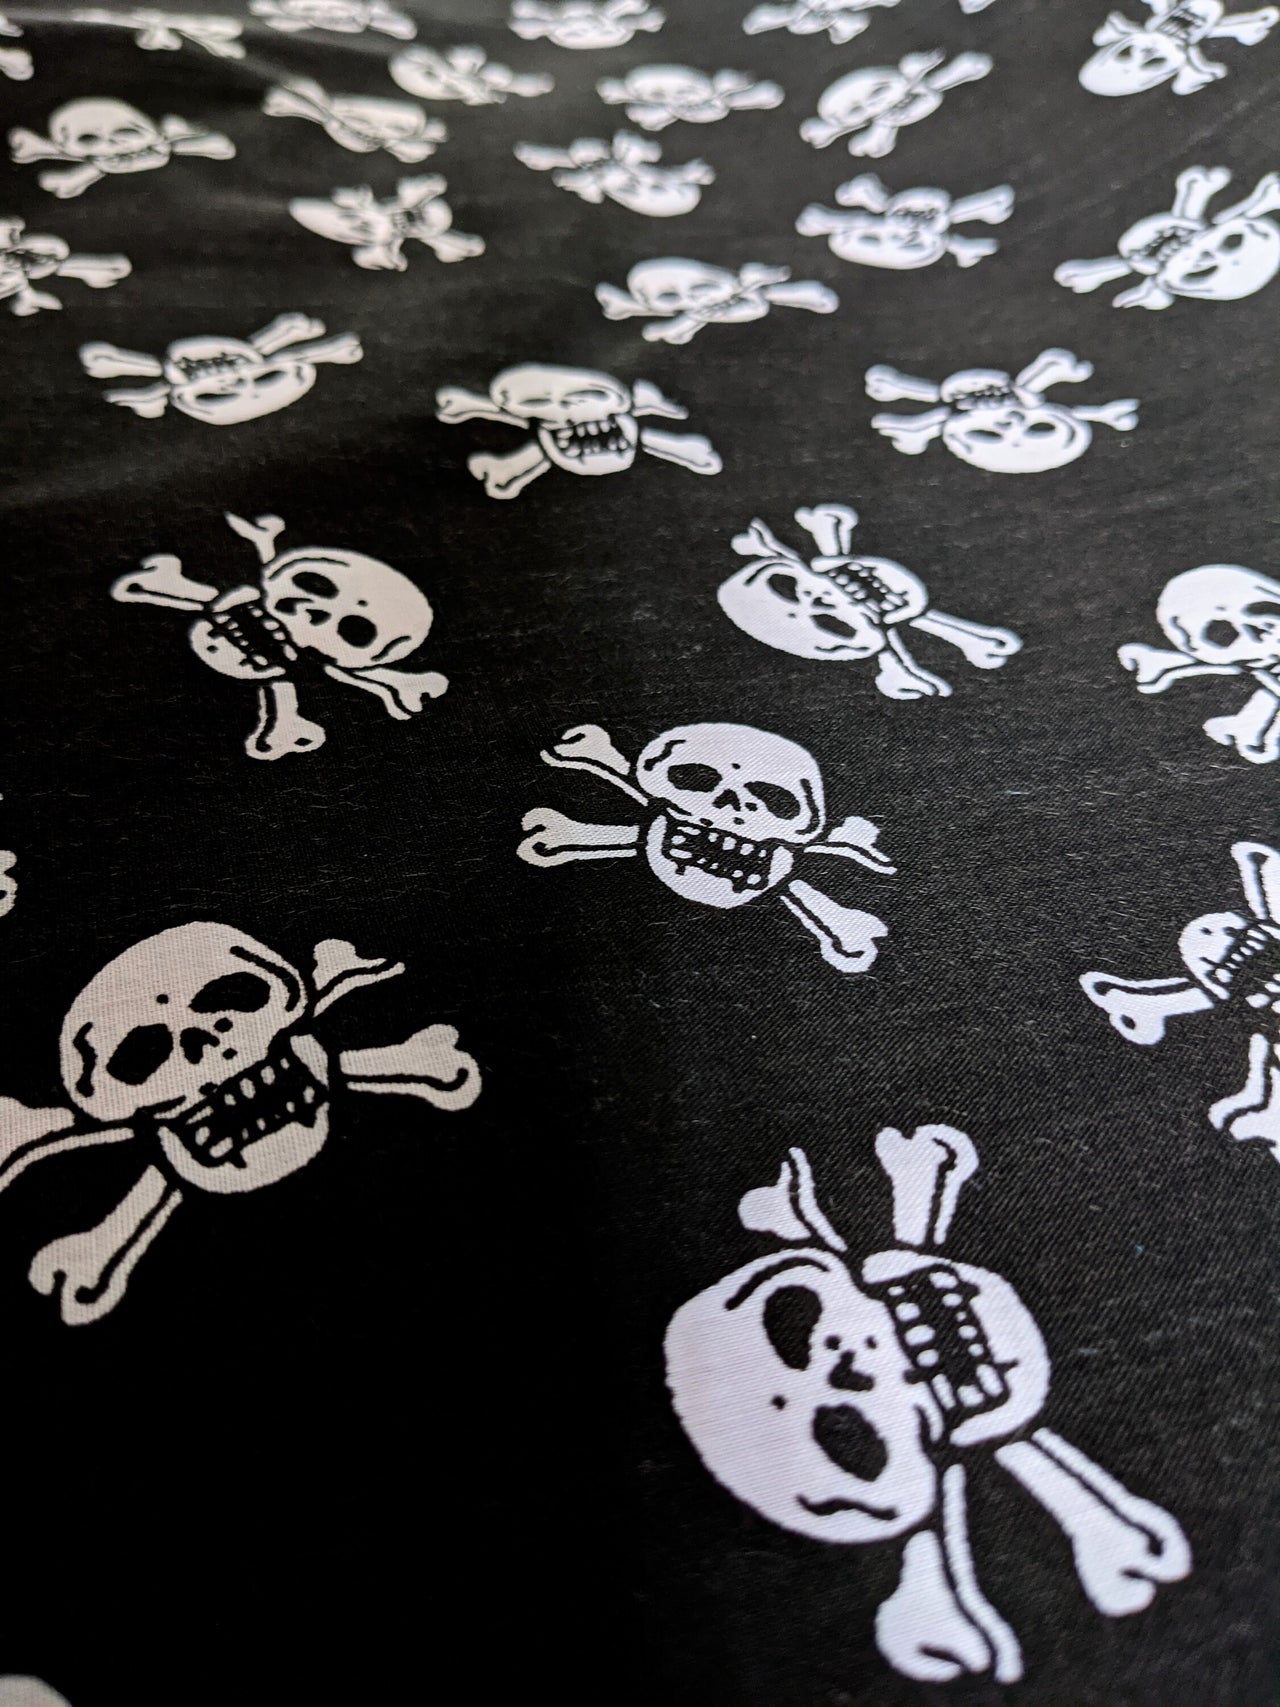 Black Pirate Skull And Crossbones Polycotton Halloween Fabric, Sewing Fabric, 43Inches Wide